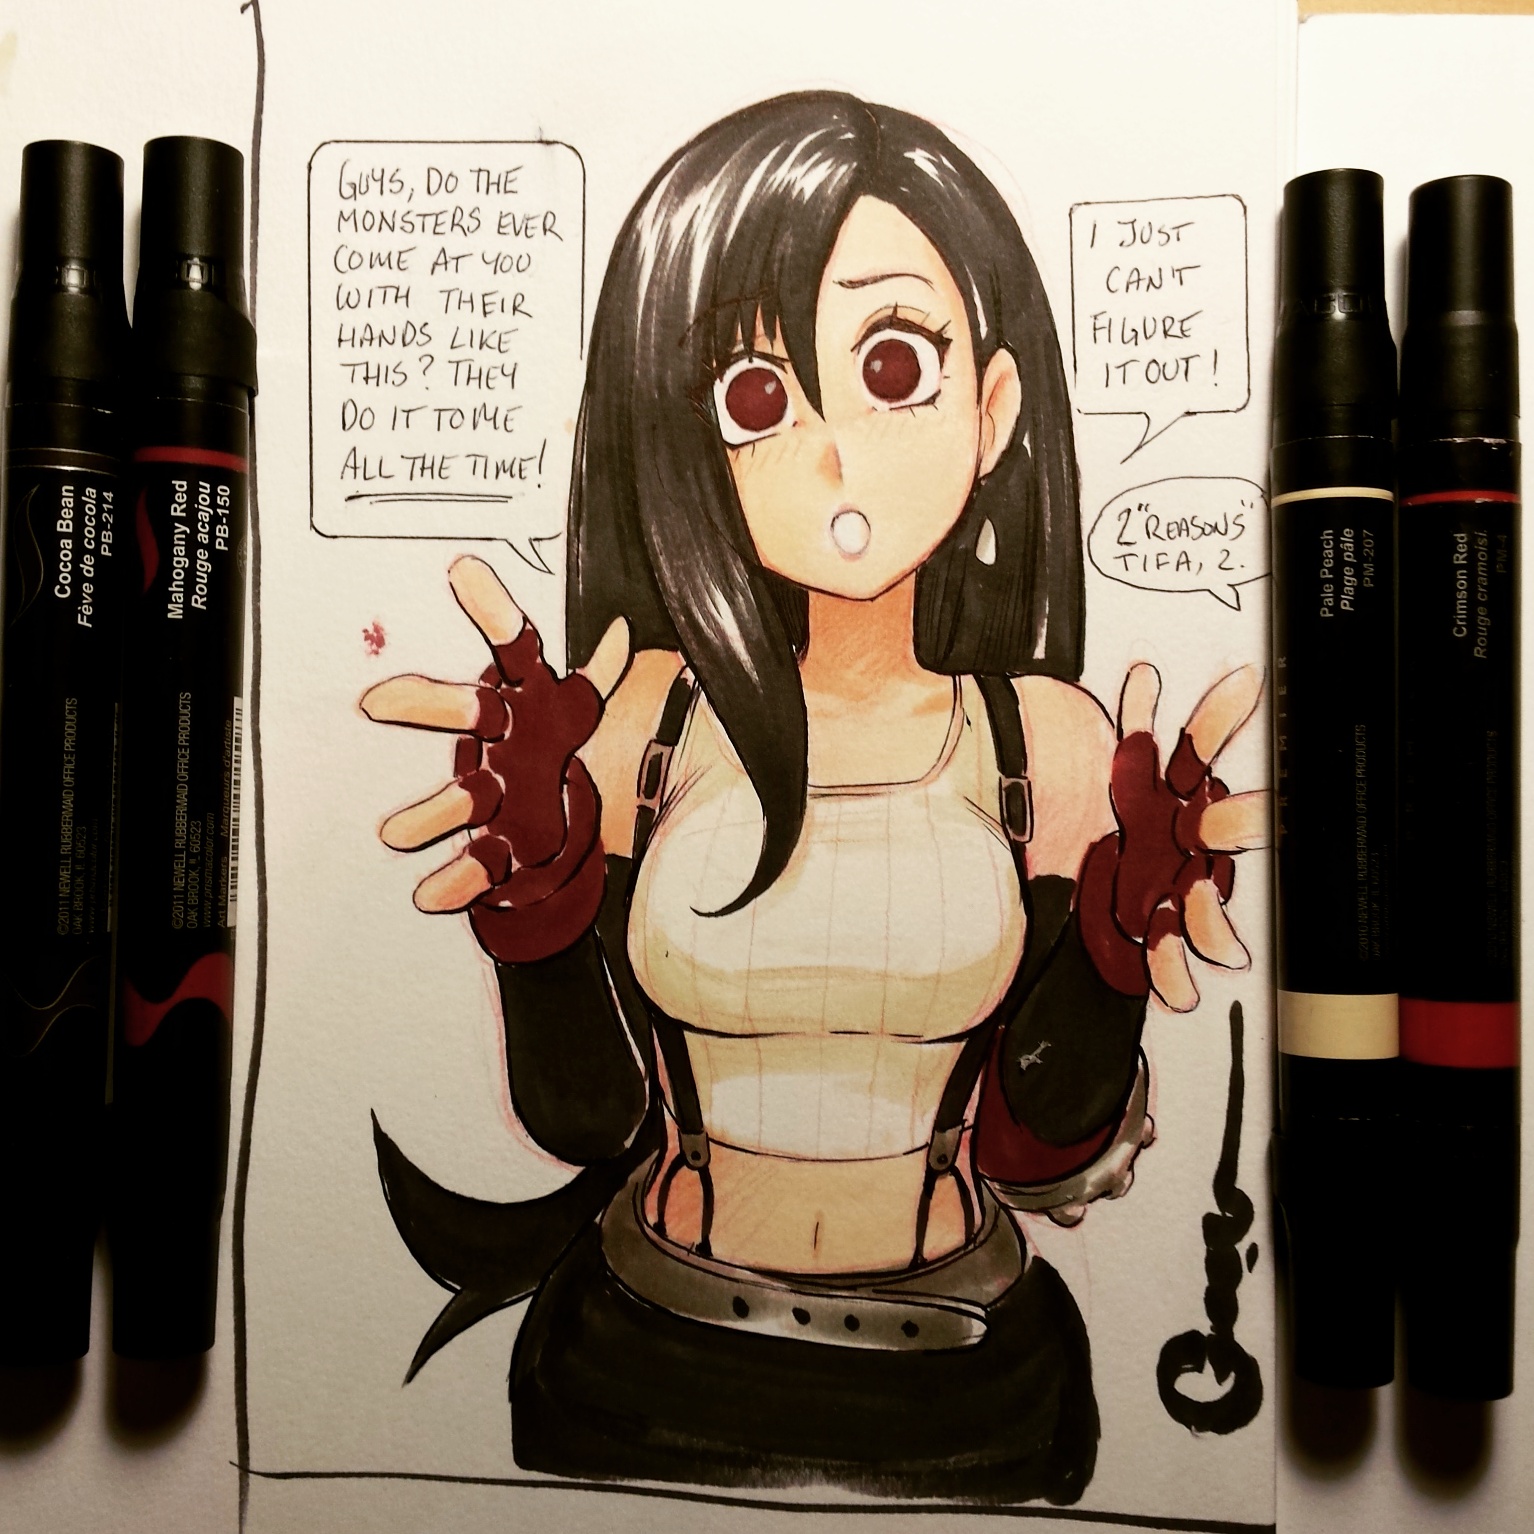 Tifa with monsters smut movies